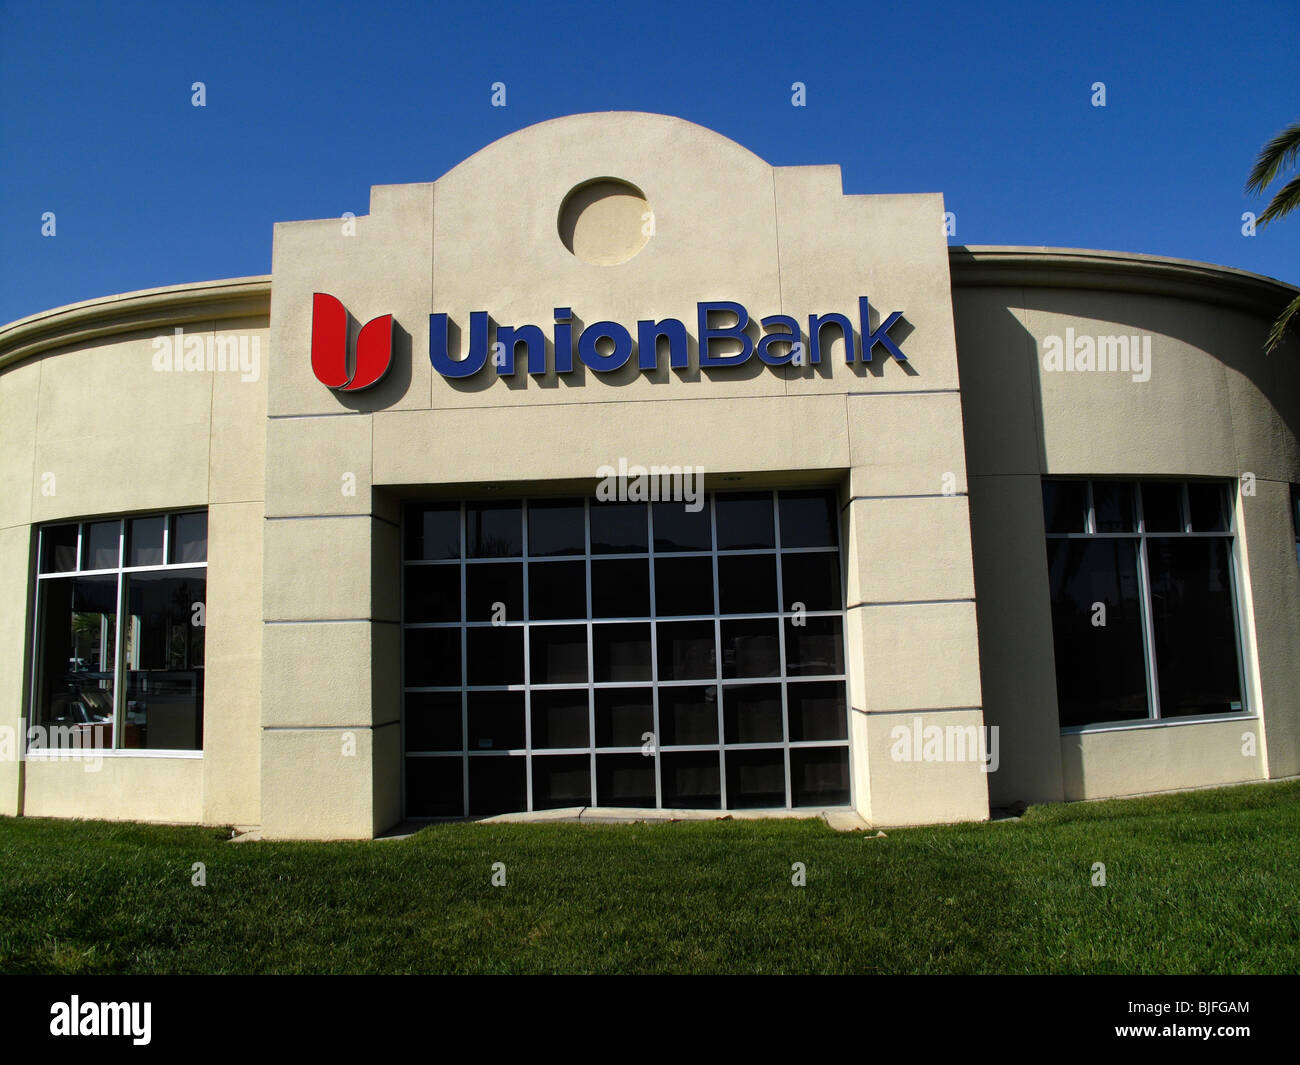 Union Bank Of California Hi Res Stock Photography And Images Alamy